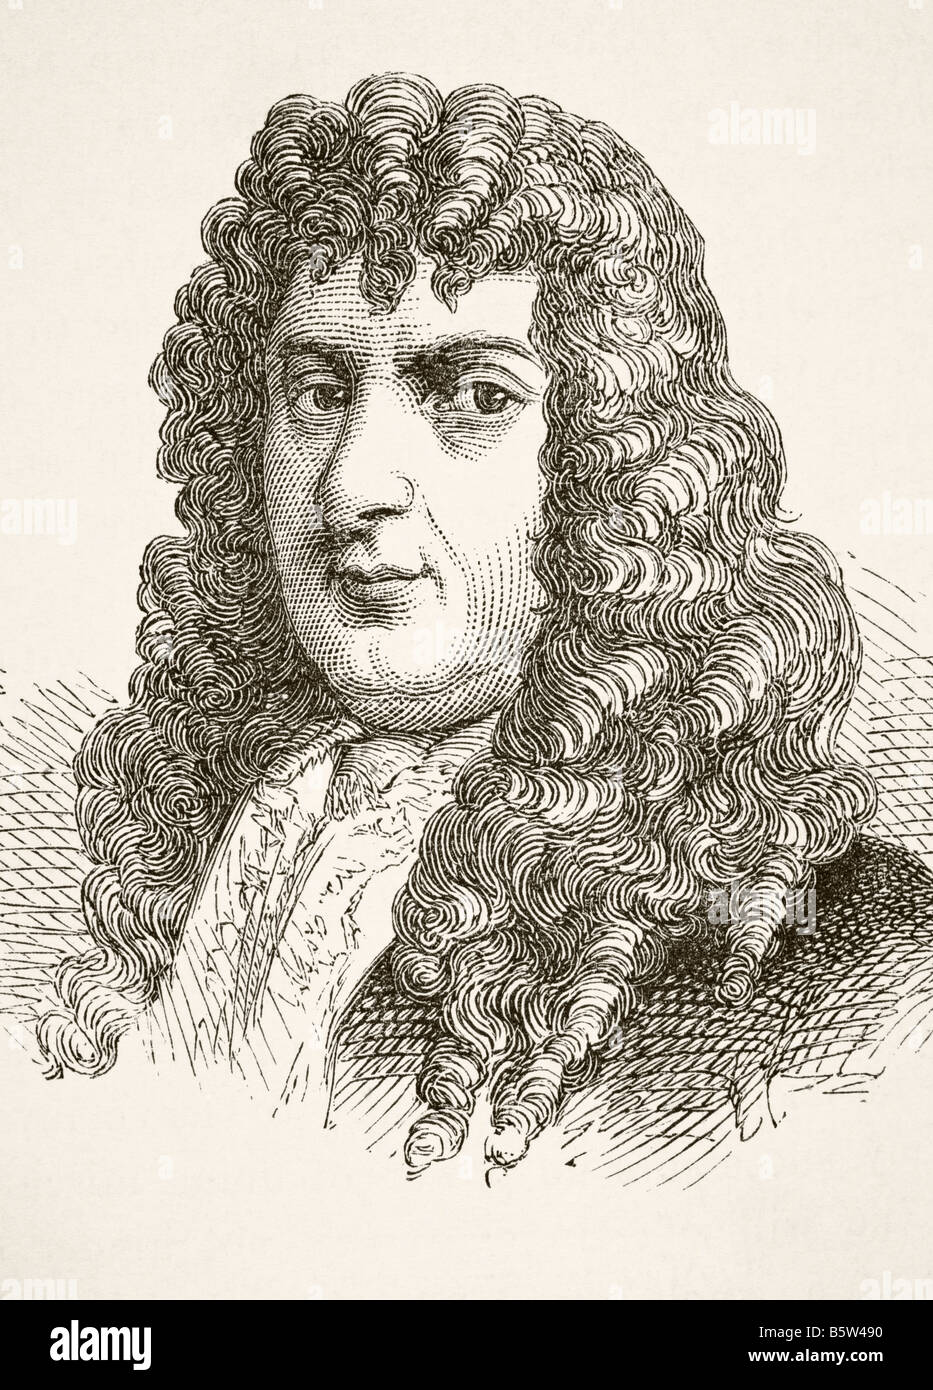 William Russell, Lord Russell 1639-1683. Englischer whig-Politiker. Stockfoto